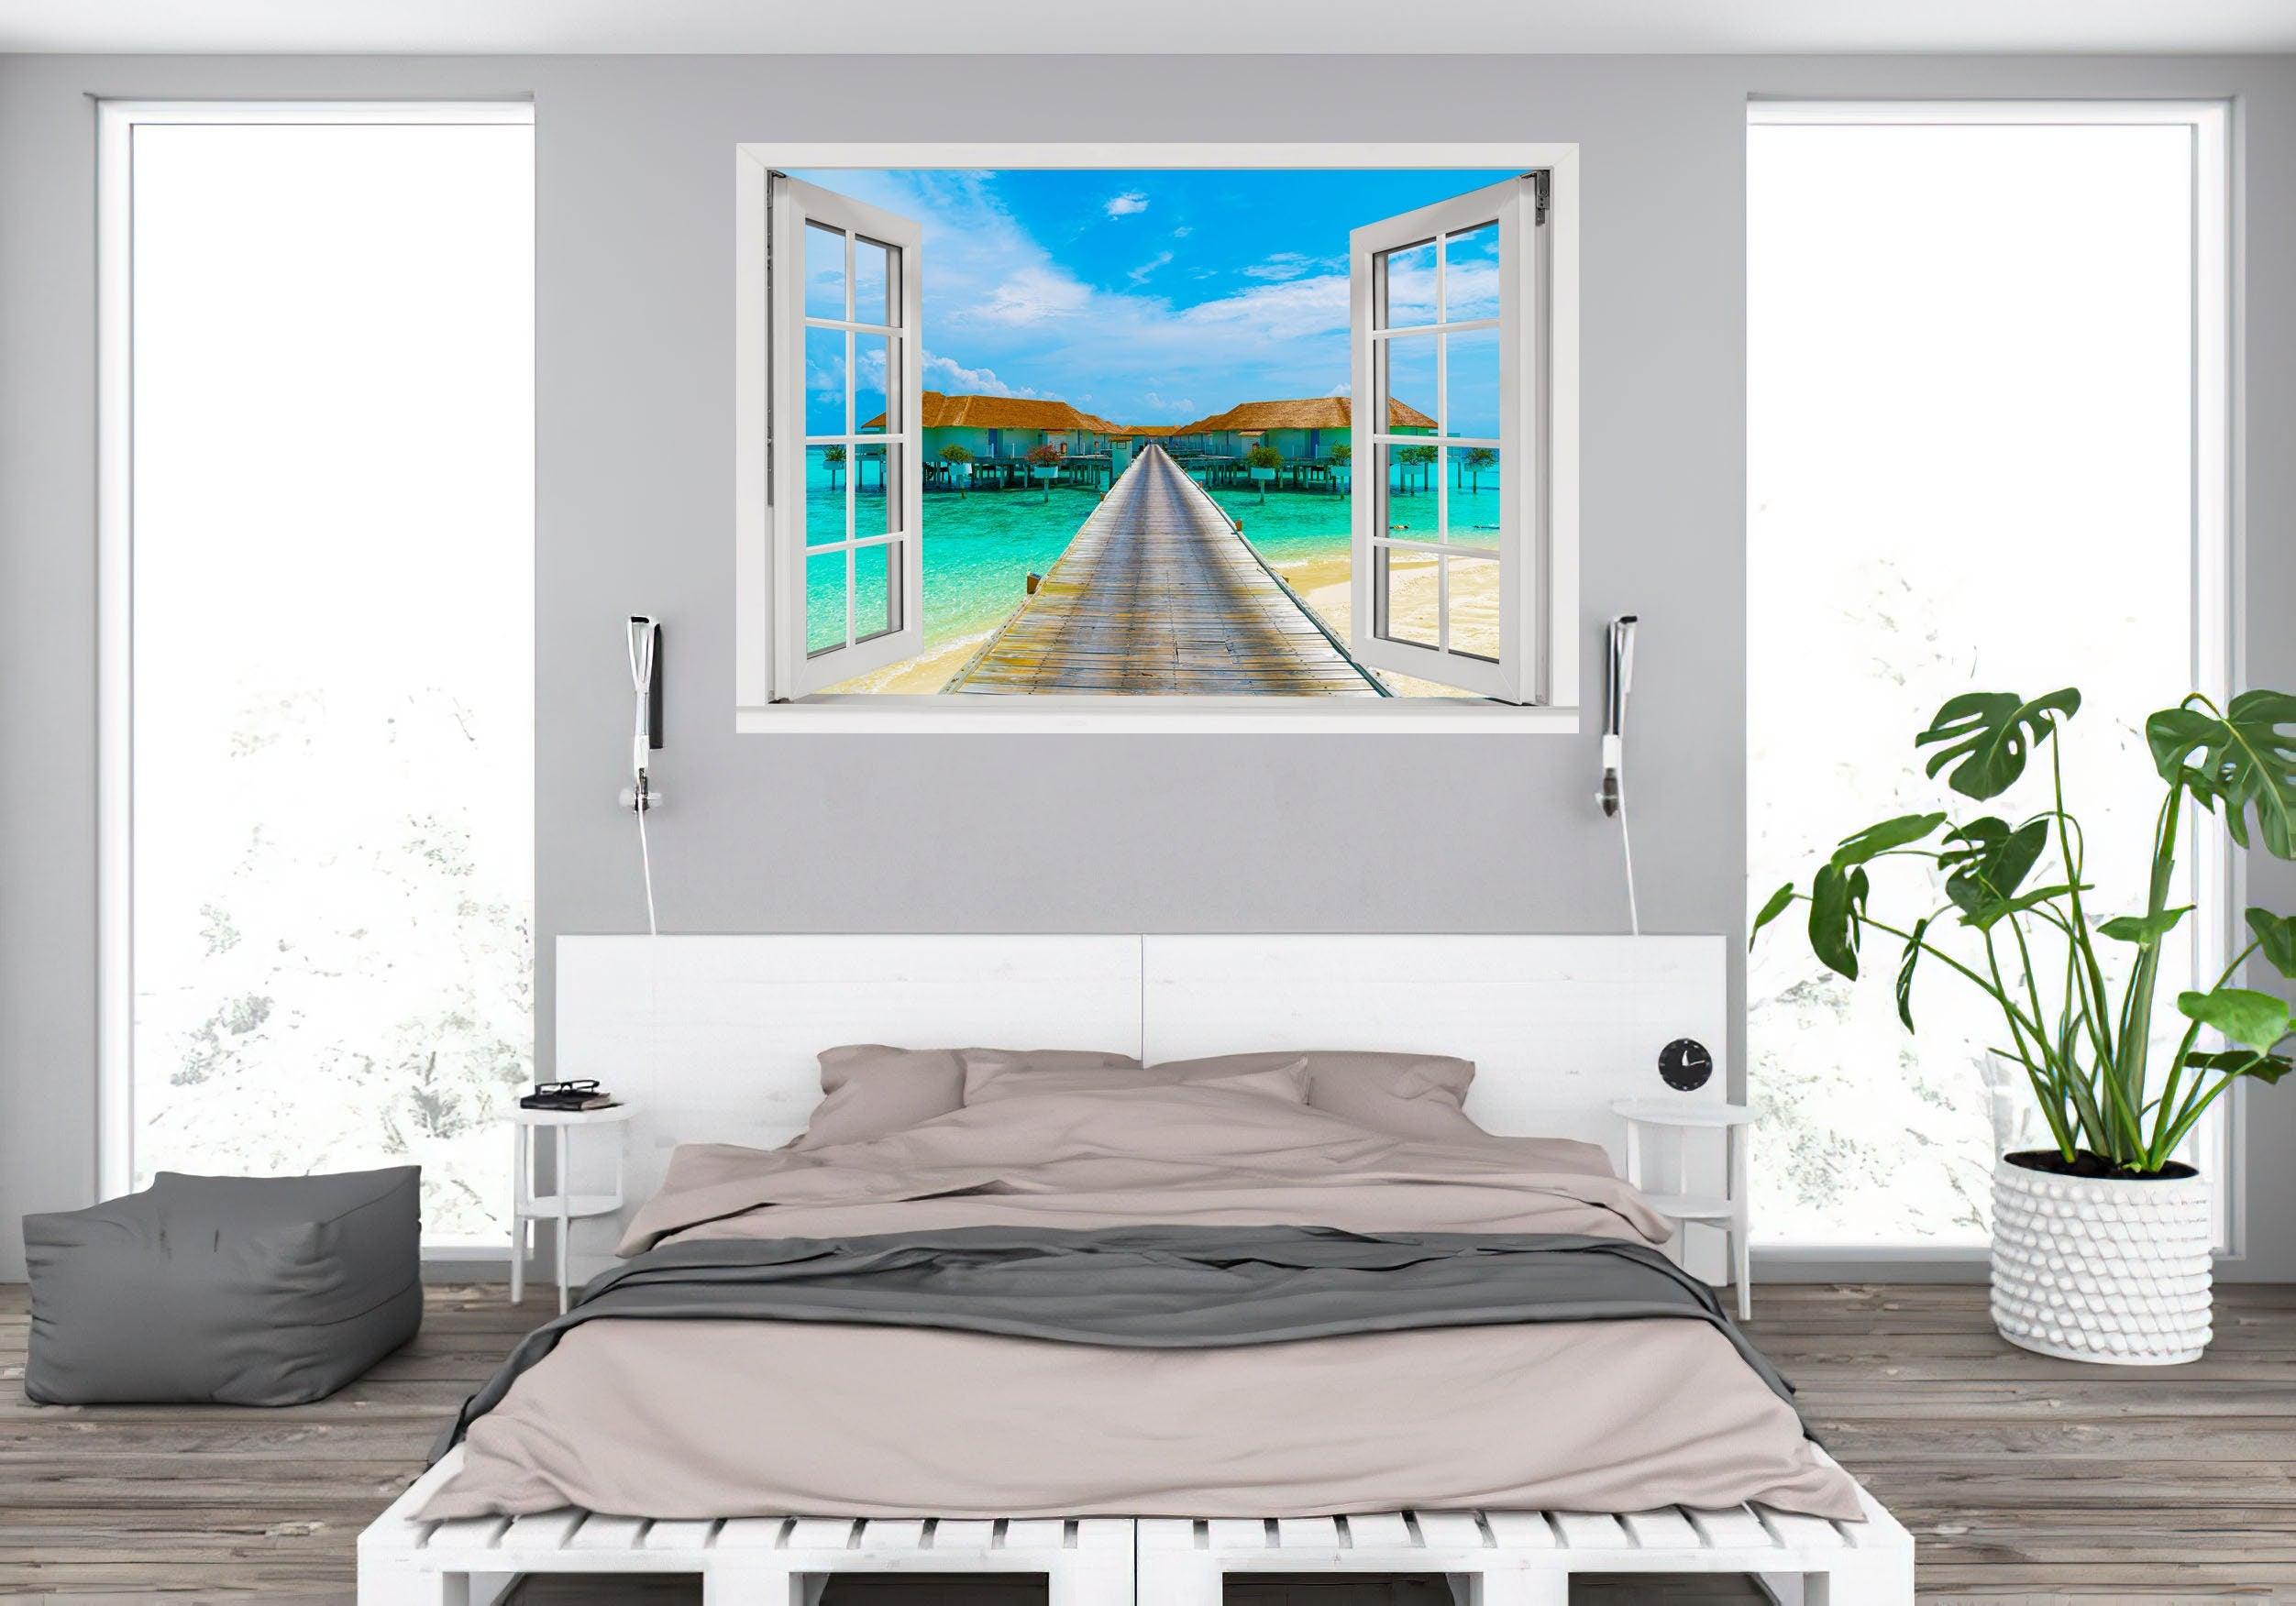 Window Scape Tropical #4 Window Decal Sticker Mural Beach Removable Fabric Window Frame Office Bedroom 3D